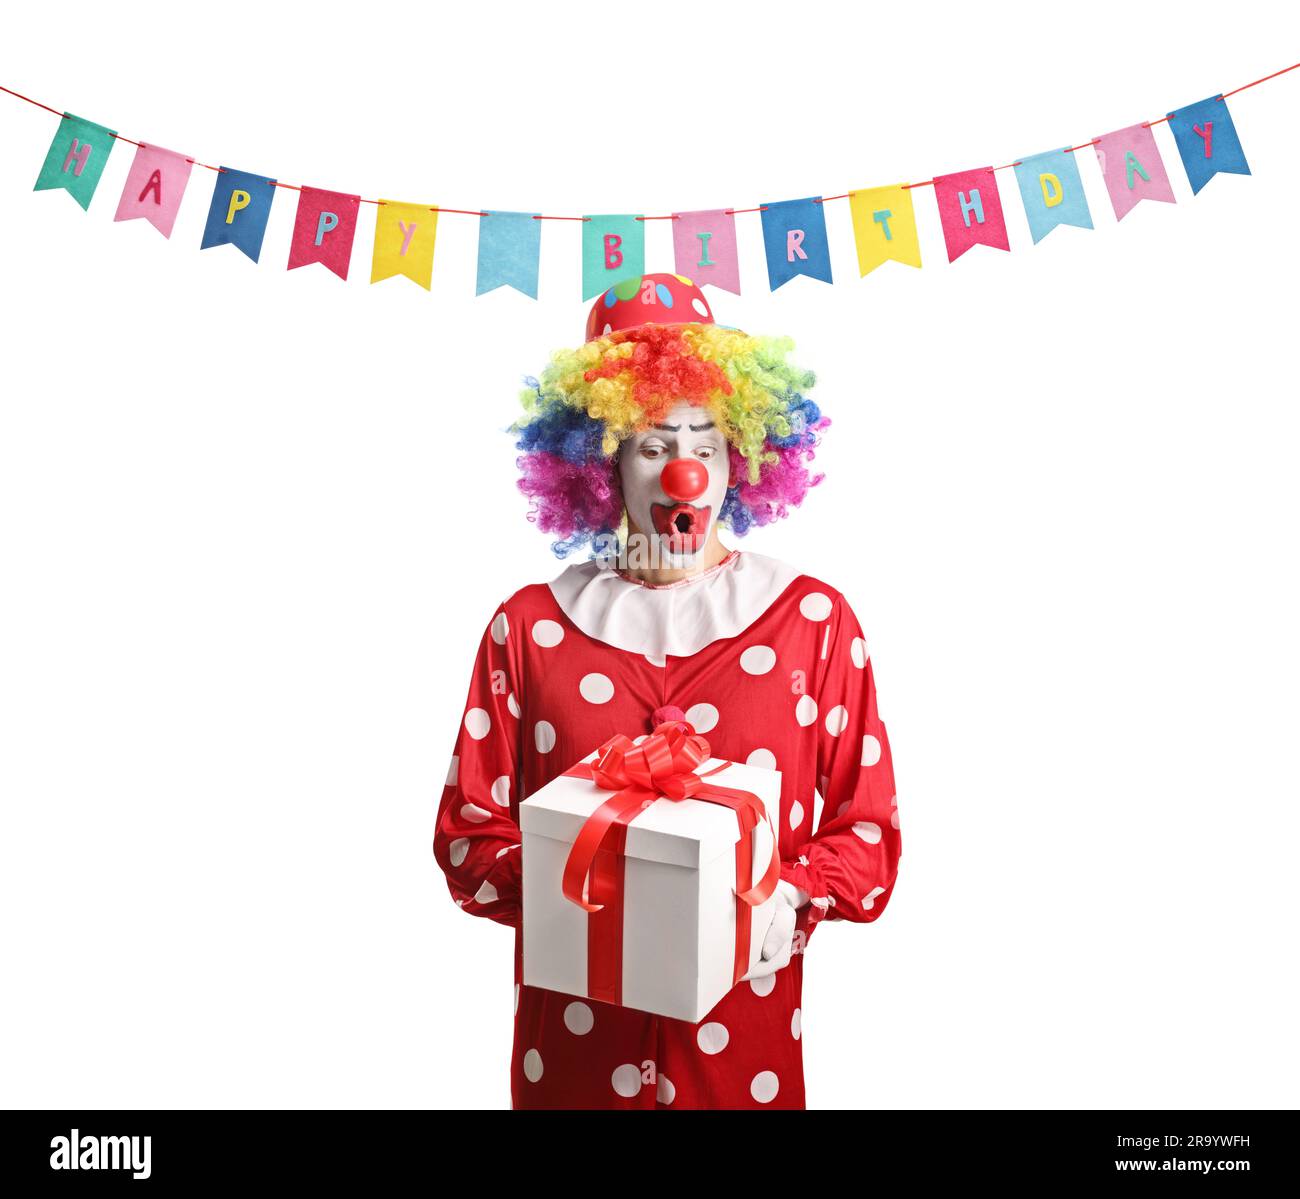 Surprised clown in a red costume holding a present box isolated on white background Stock Photo